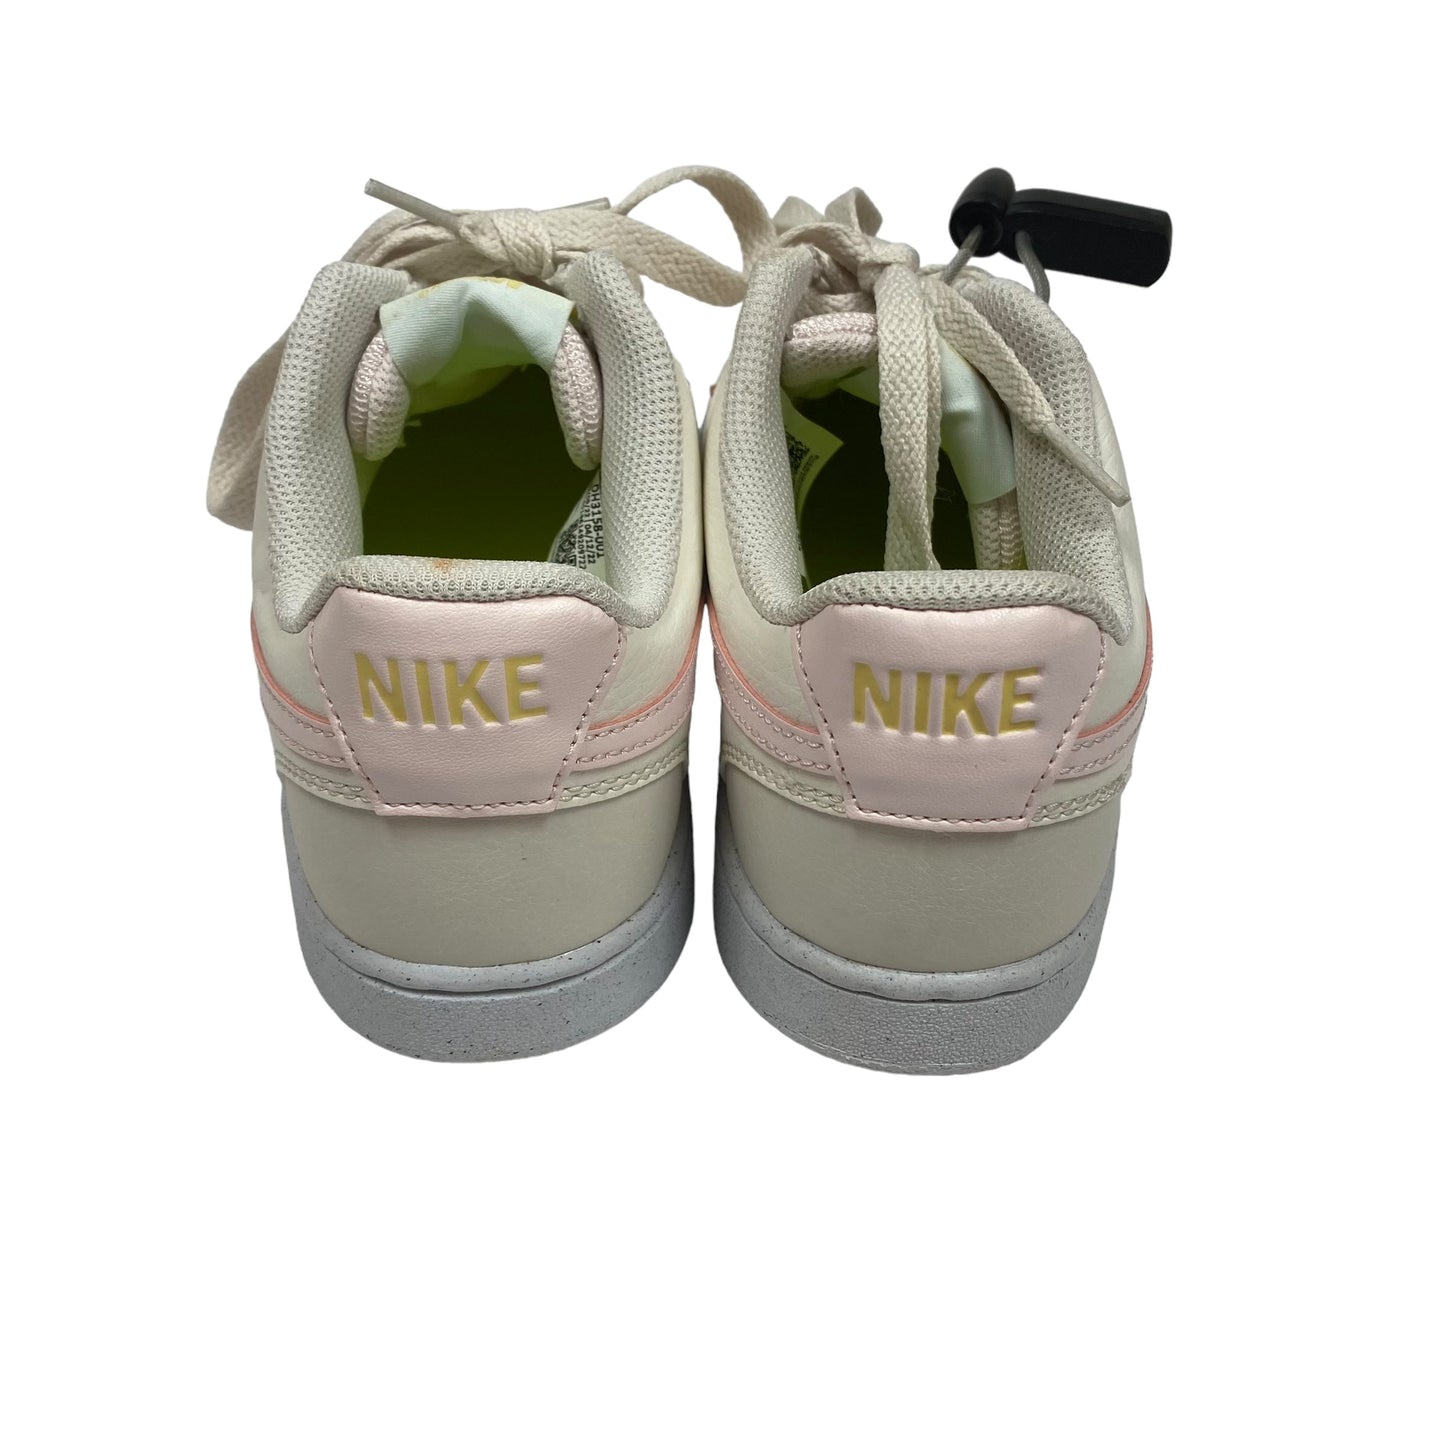 Cream Shoes Sneakers Nike, Size 8